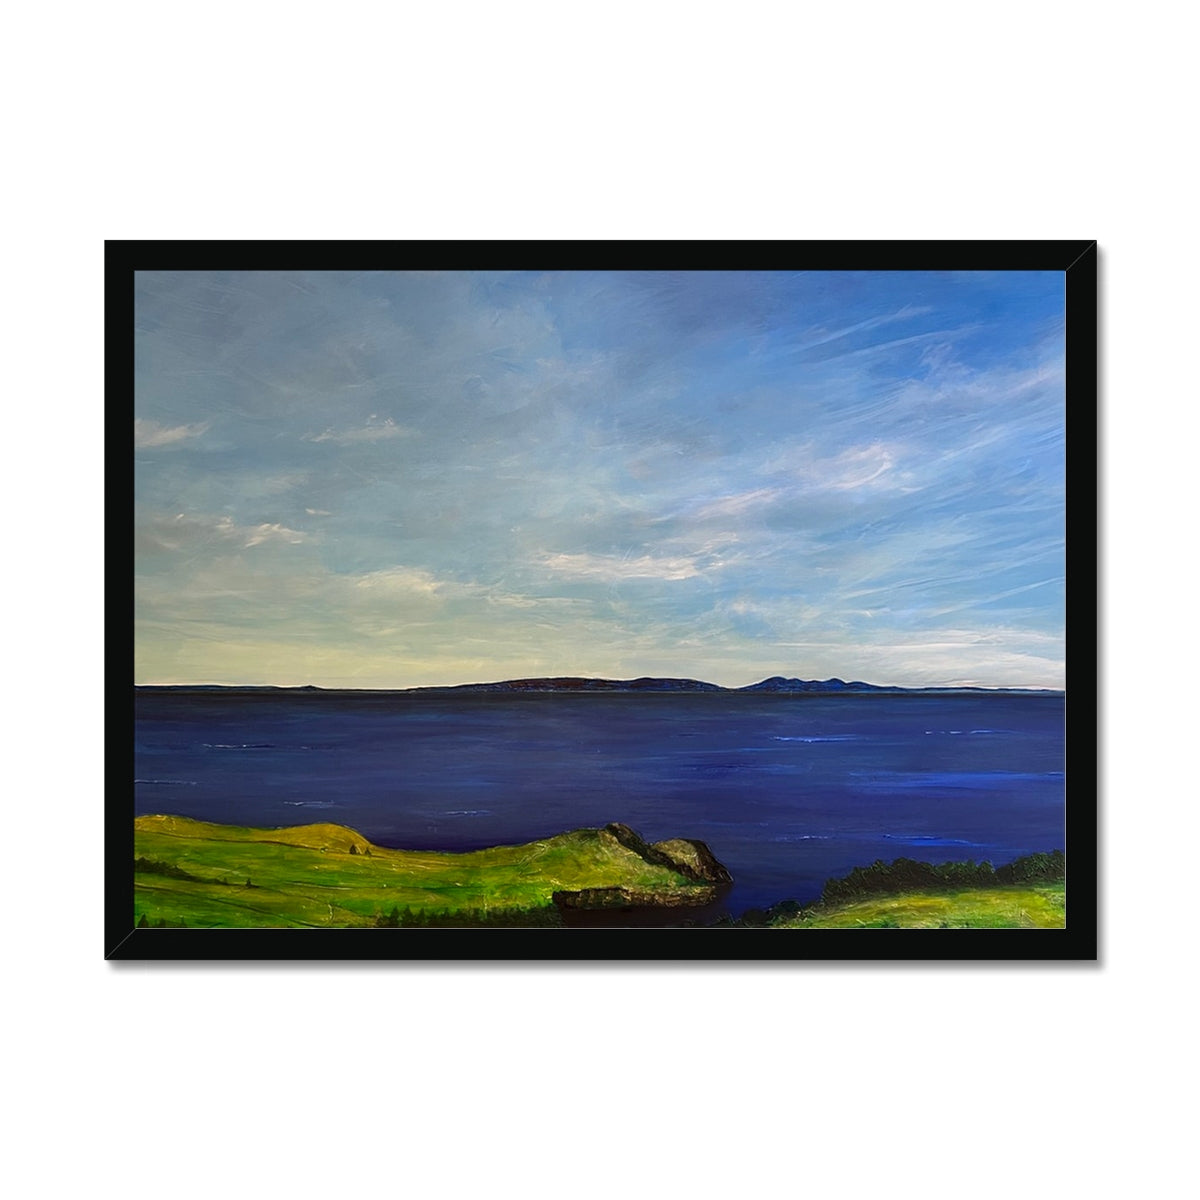 From Ireland To Scotland Painting | Framed Prints From Scotland-Framed Prints-World Art Gallery-A2 Landscape-Black Frame-Paintings, Prints, Homeware, Art Gifts From Scotland By Scottish Artist Kevin Hunter